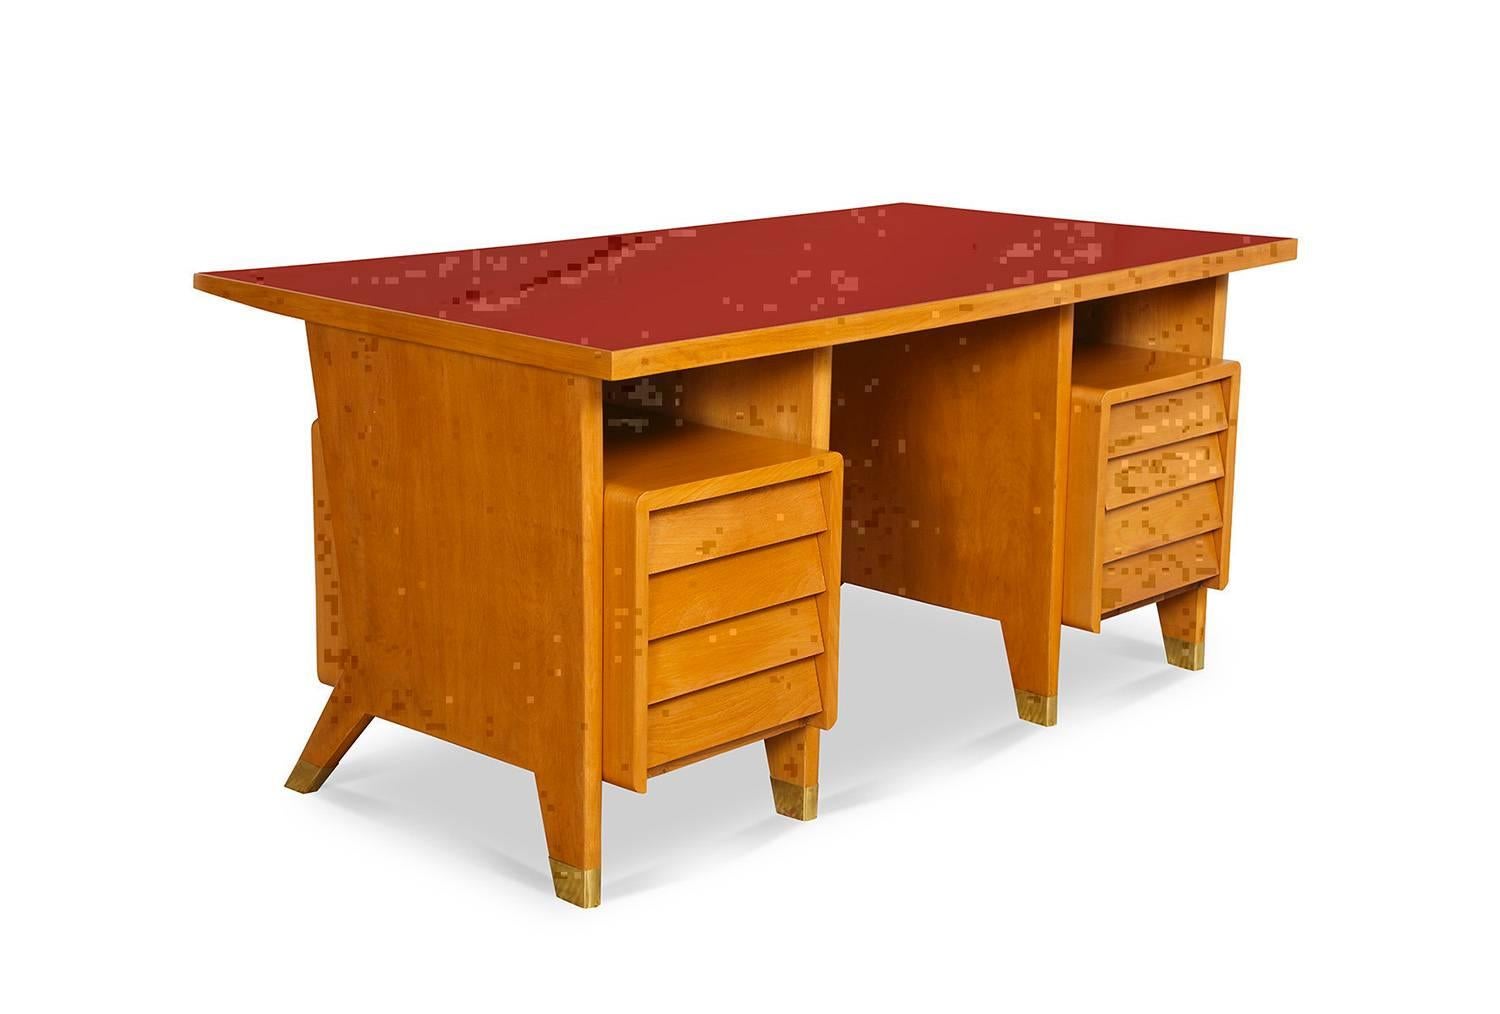  Gio Ponti custom eight-drawer desk.  From a small edition created for administrative offices in Forli, Italy. Blonde wood desk with red linoleum top, shingled drawer faces and brass cuffs at feet. A great, graphic form that rarely turns up.